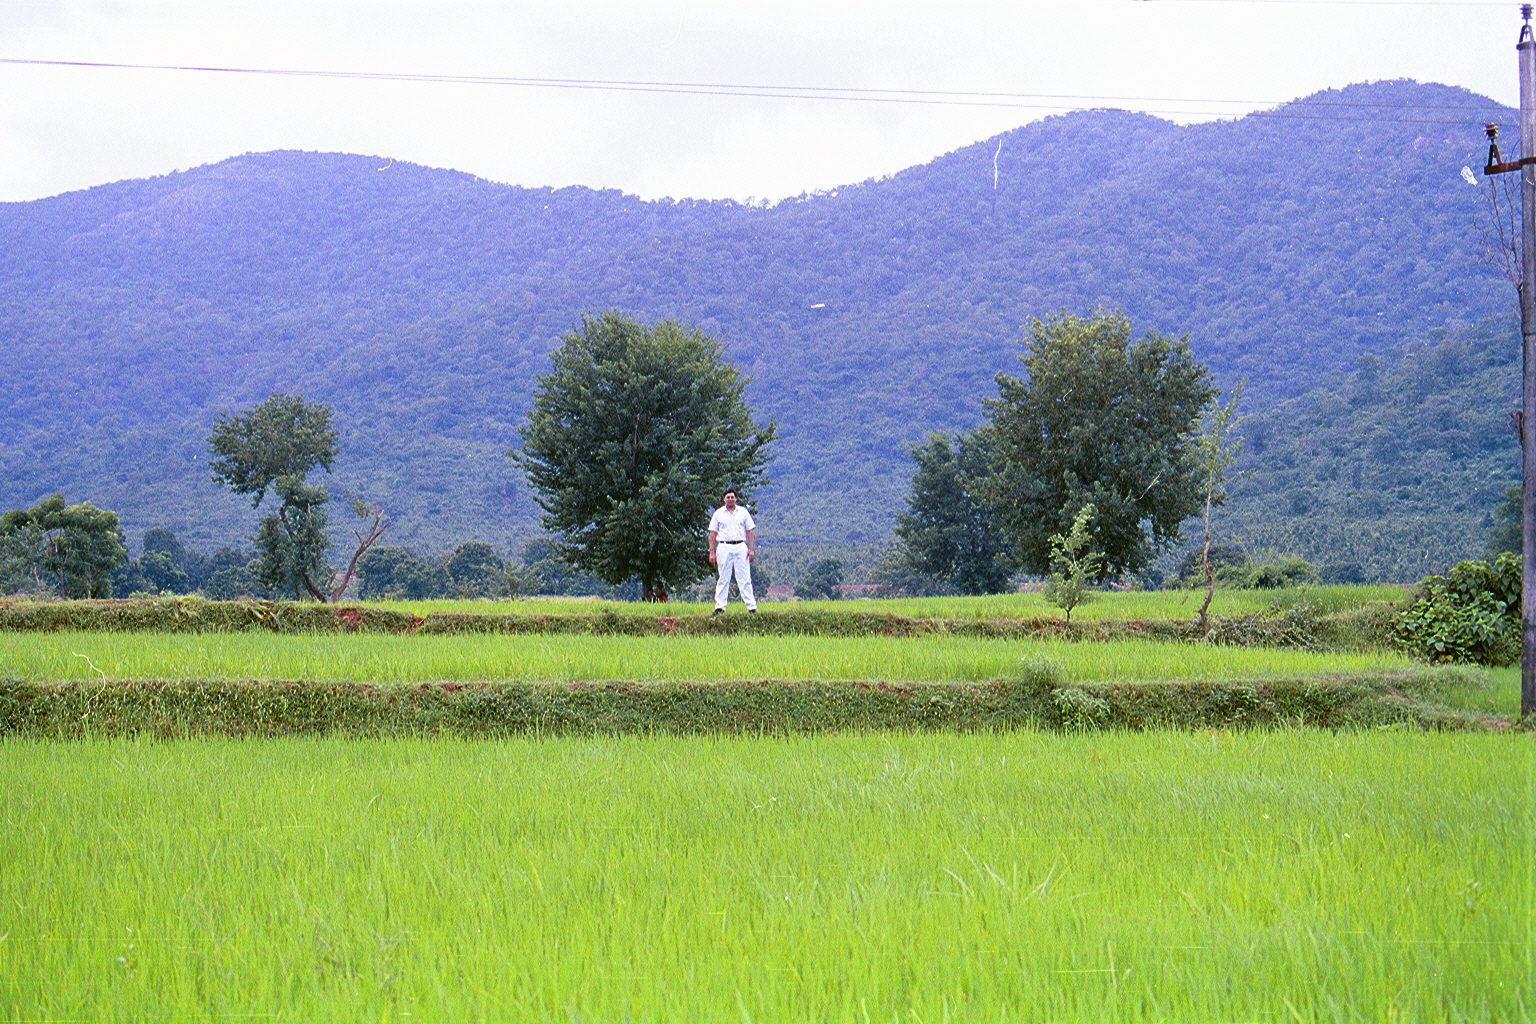 Myself standing by the hills; on the outer perimeter of our farm boundary, in 'Mallehpur', Monghyr(district), BIHAR. Presently our farm needs capital investment; ( a new Tractor-trailer, an alumunium grain silo, fencing of the property perimeter, organic fertilizers, ) due to years of neglect !